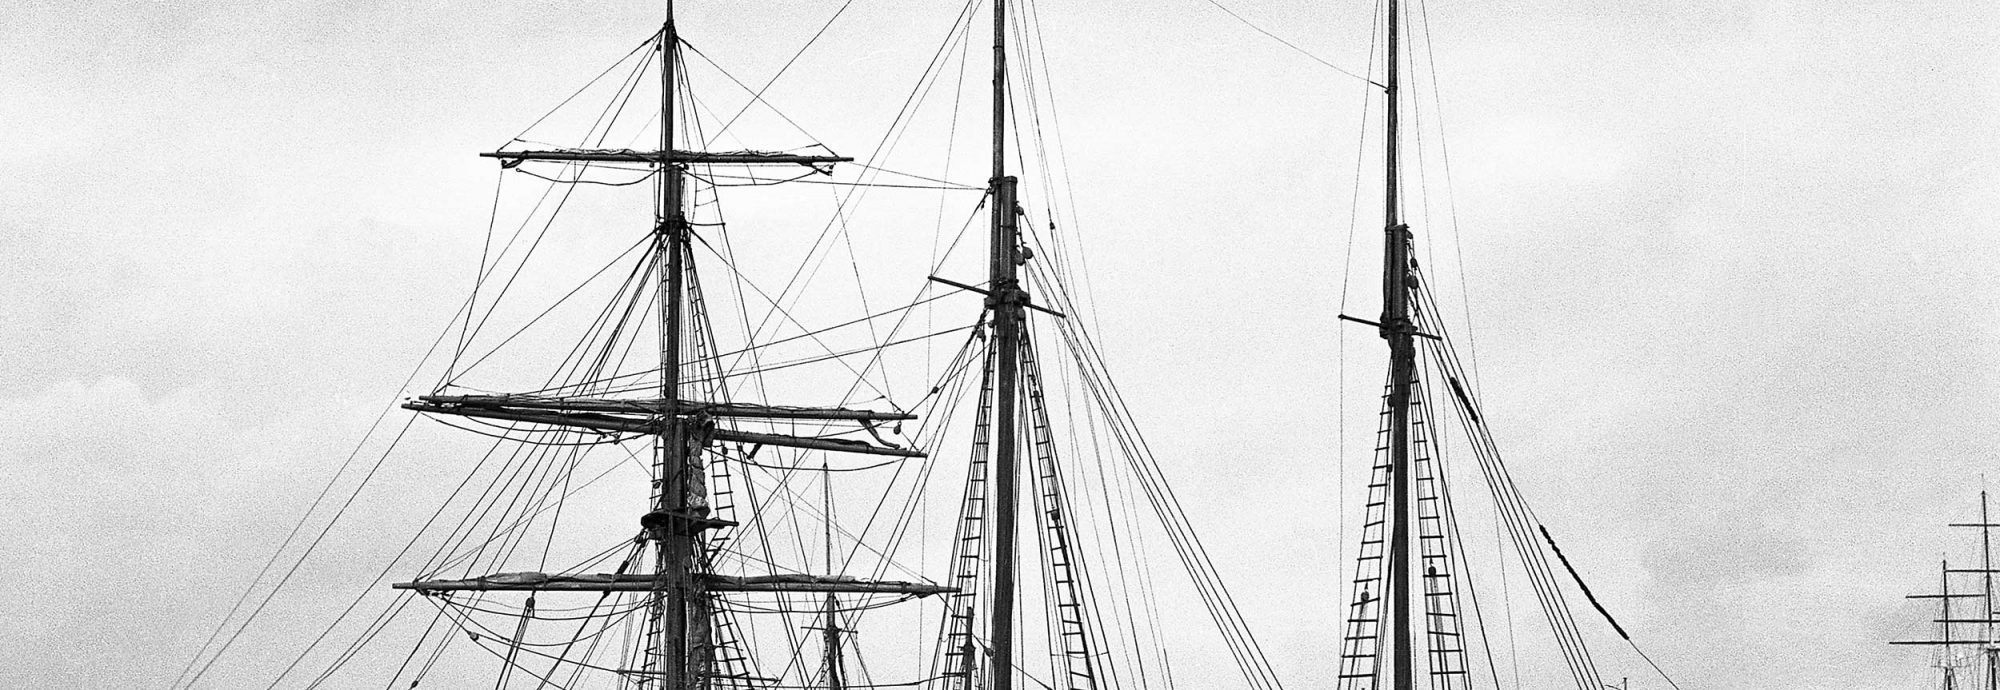 Black and white photo of the barquentine 'Waterwitch' in Falmouth harbour.